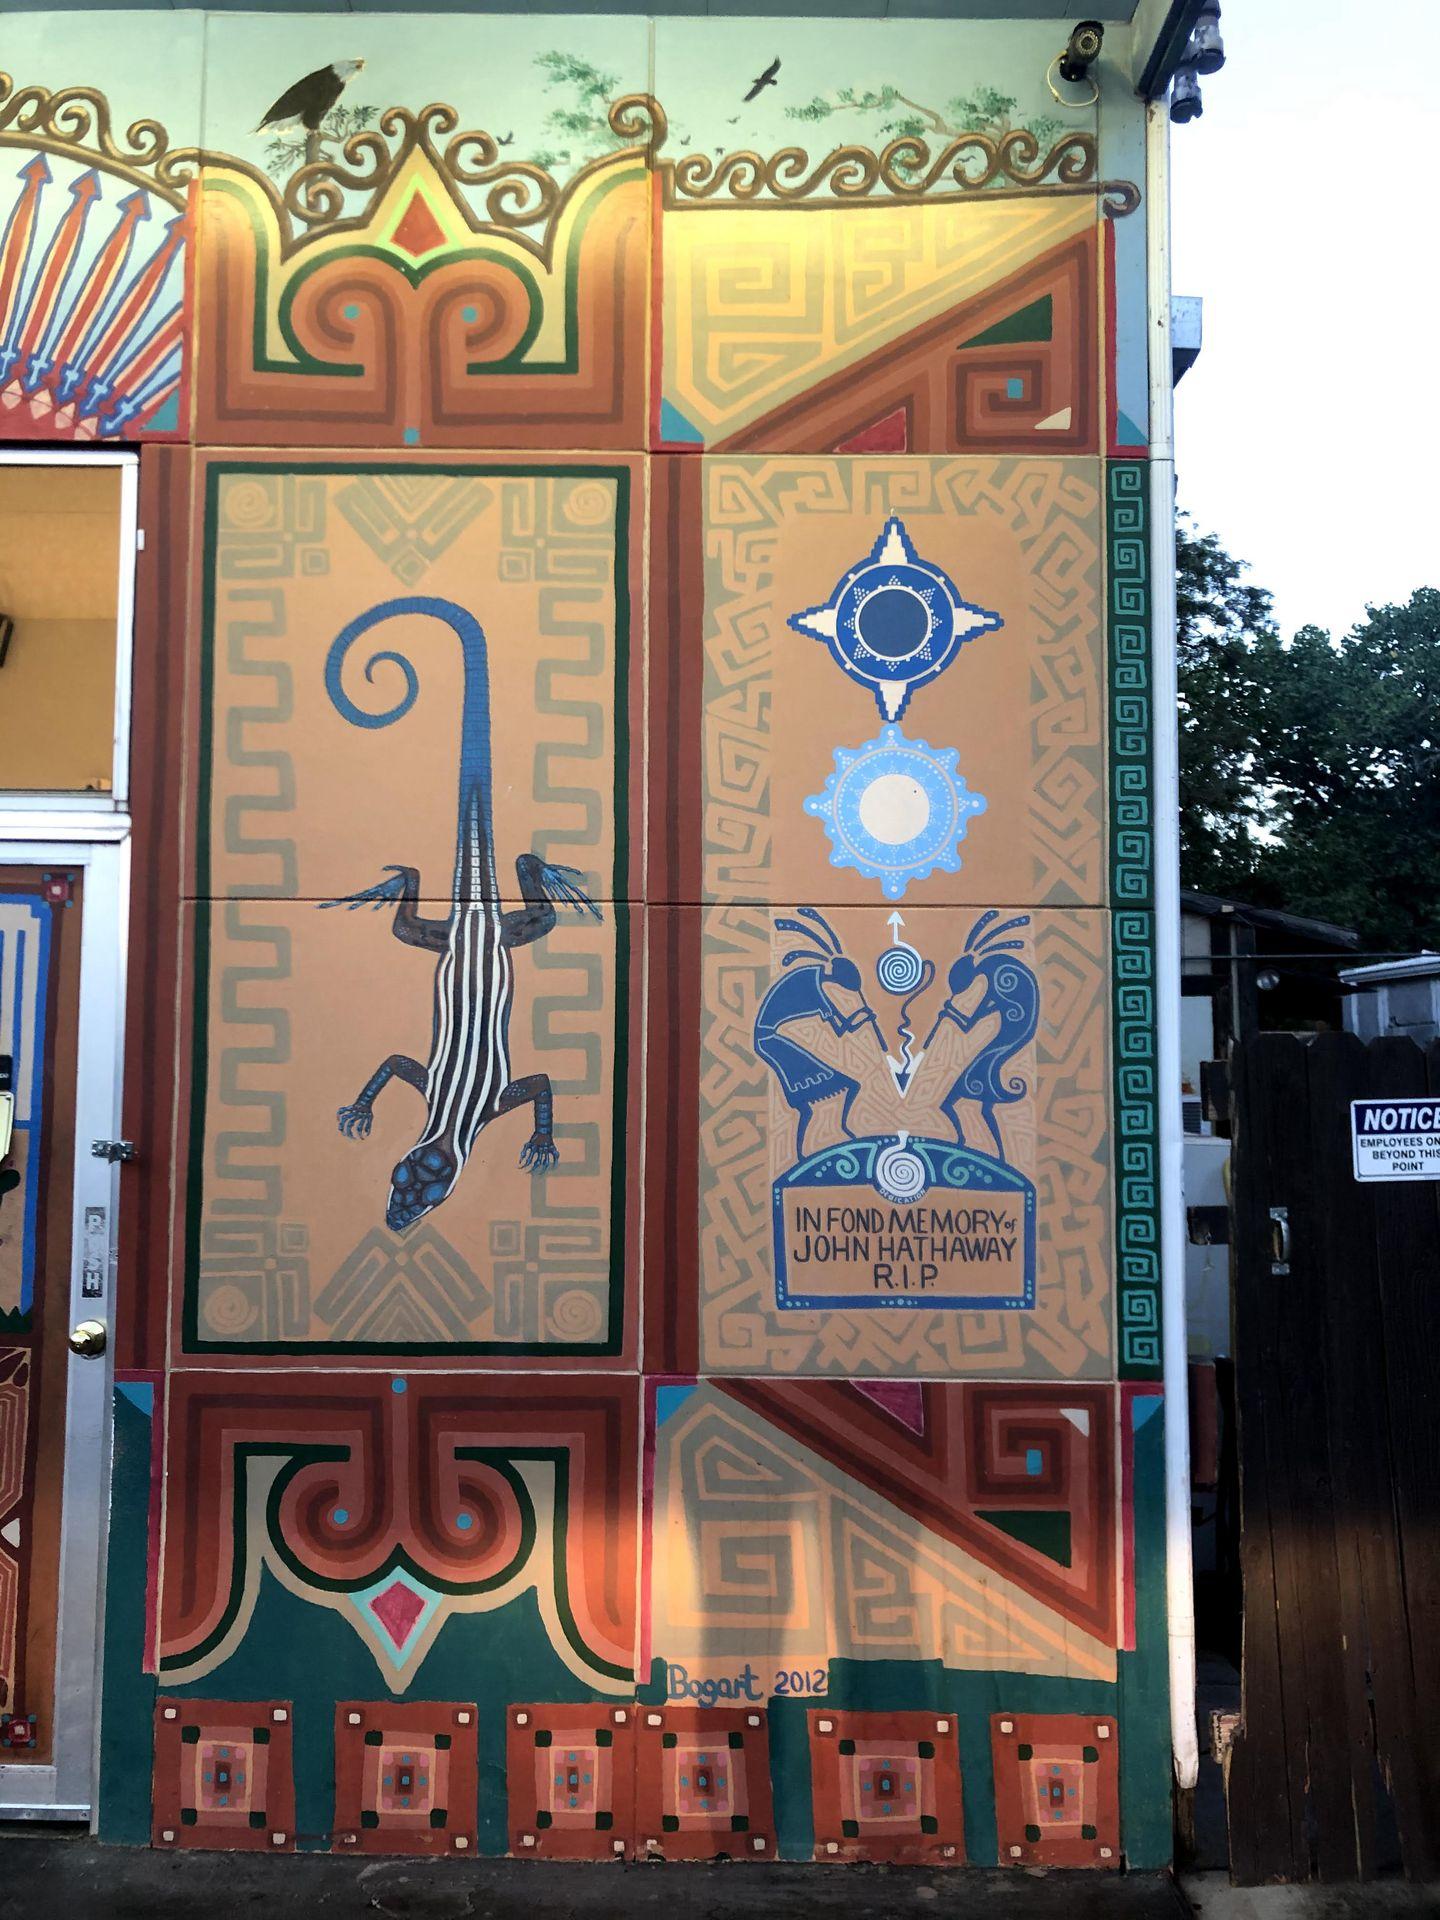 A mural on the outside of Whiptail with a lizard and abstract shapes.